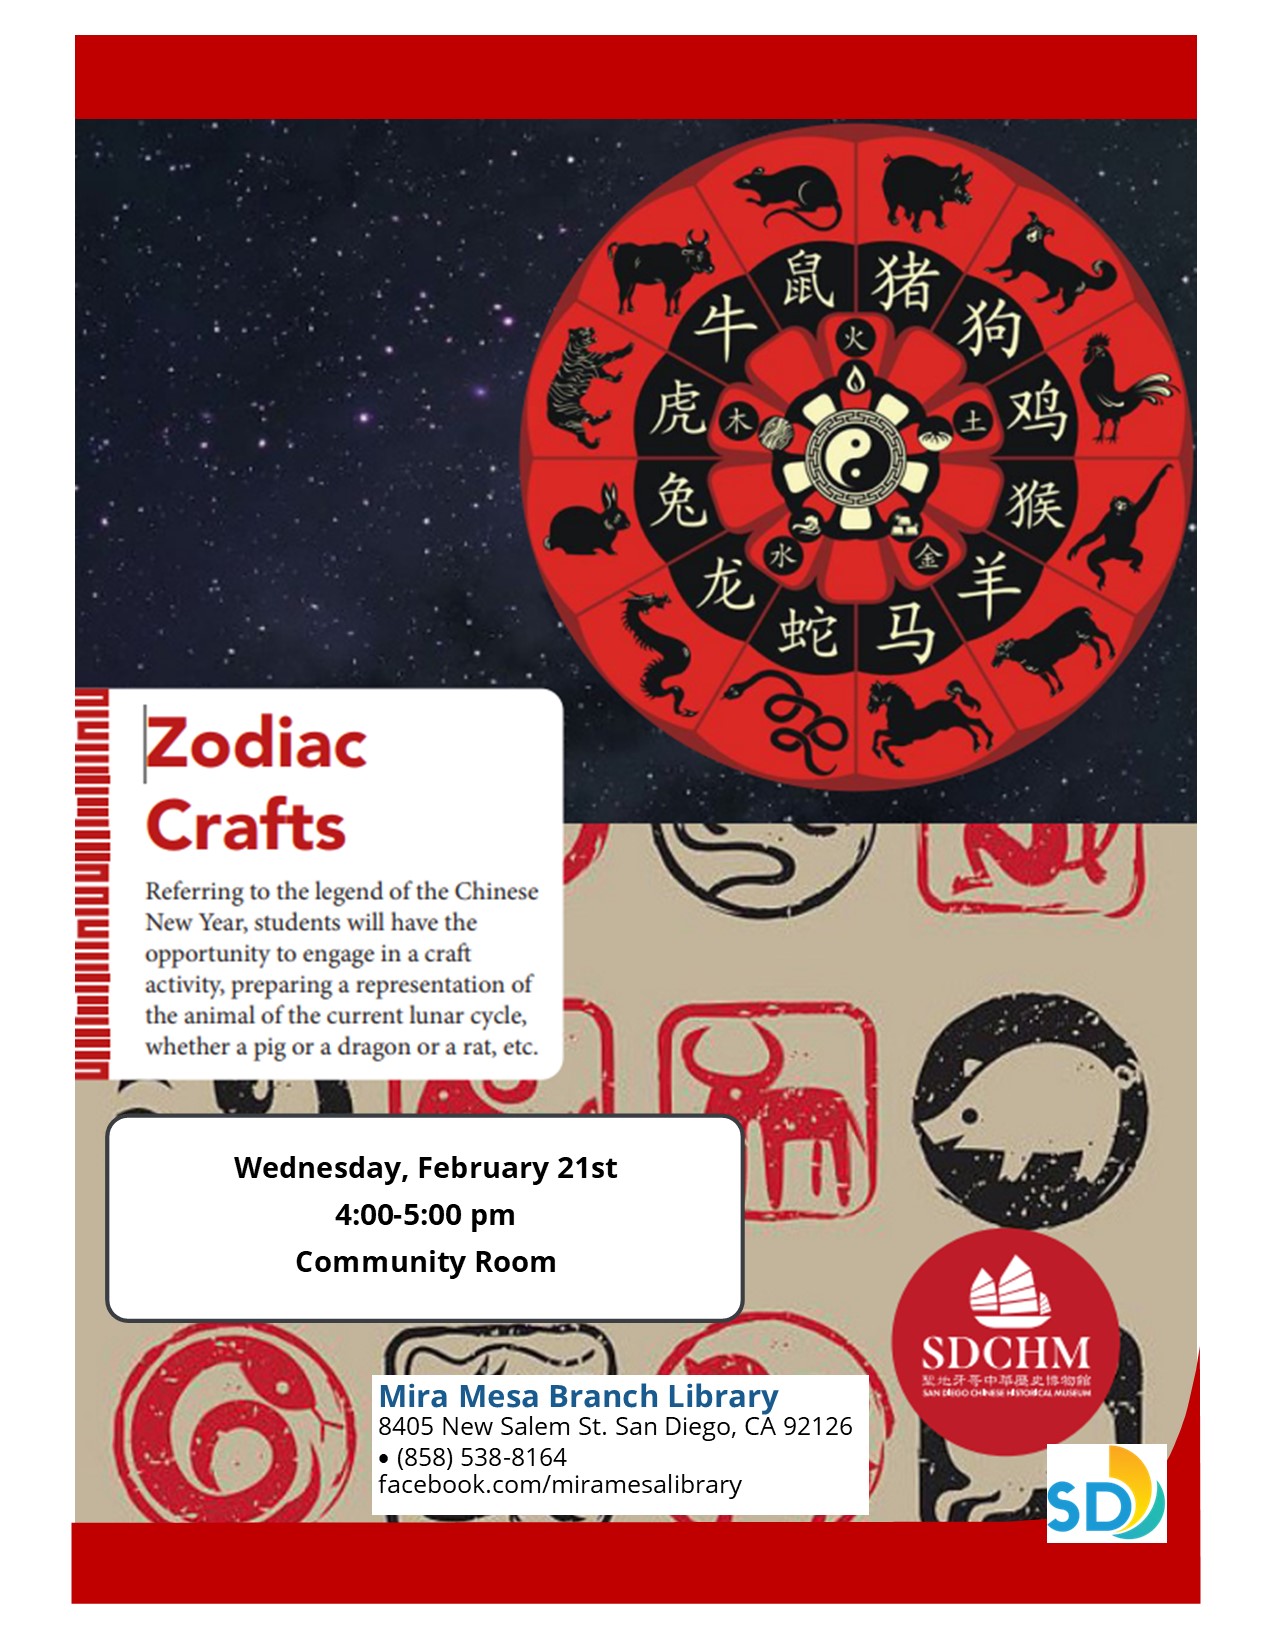 Red, black and beige flyer with Chinese Zodiac symbols